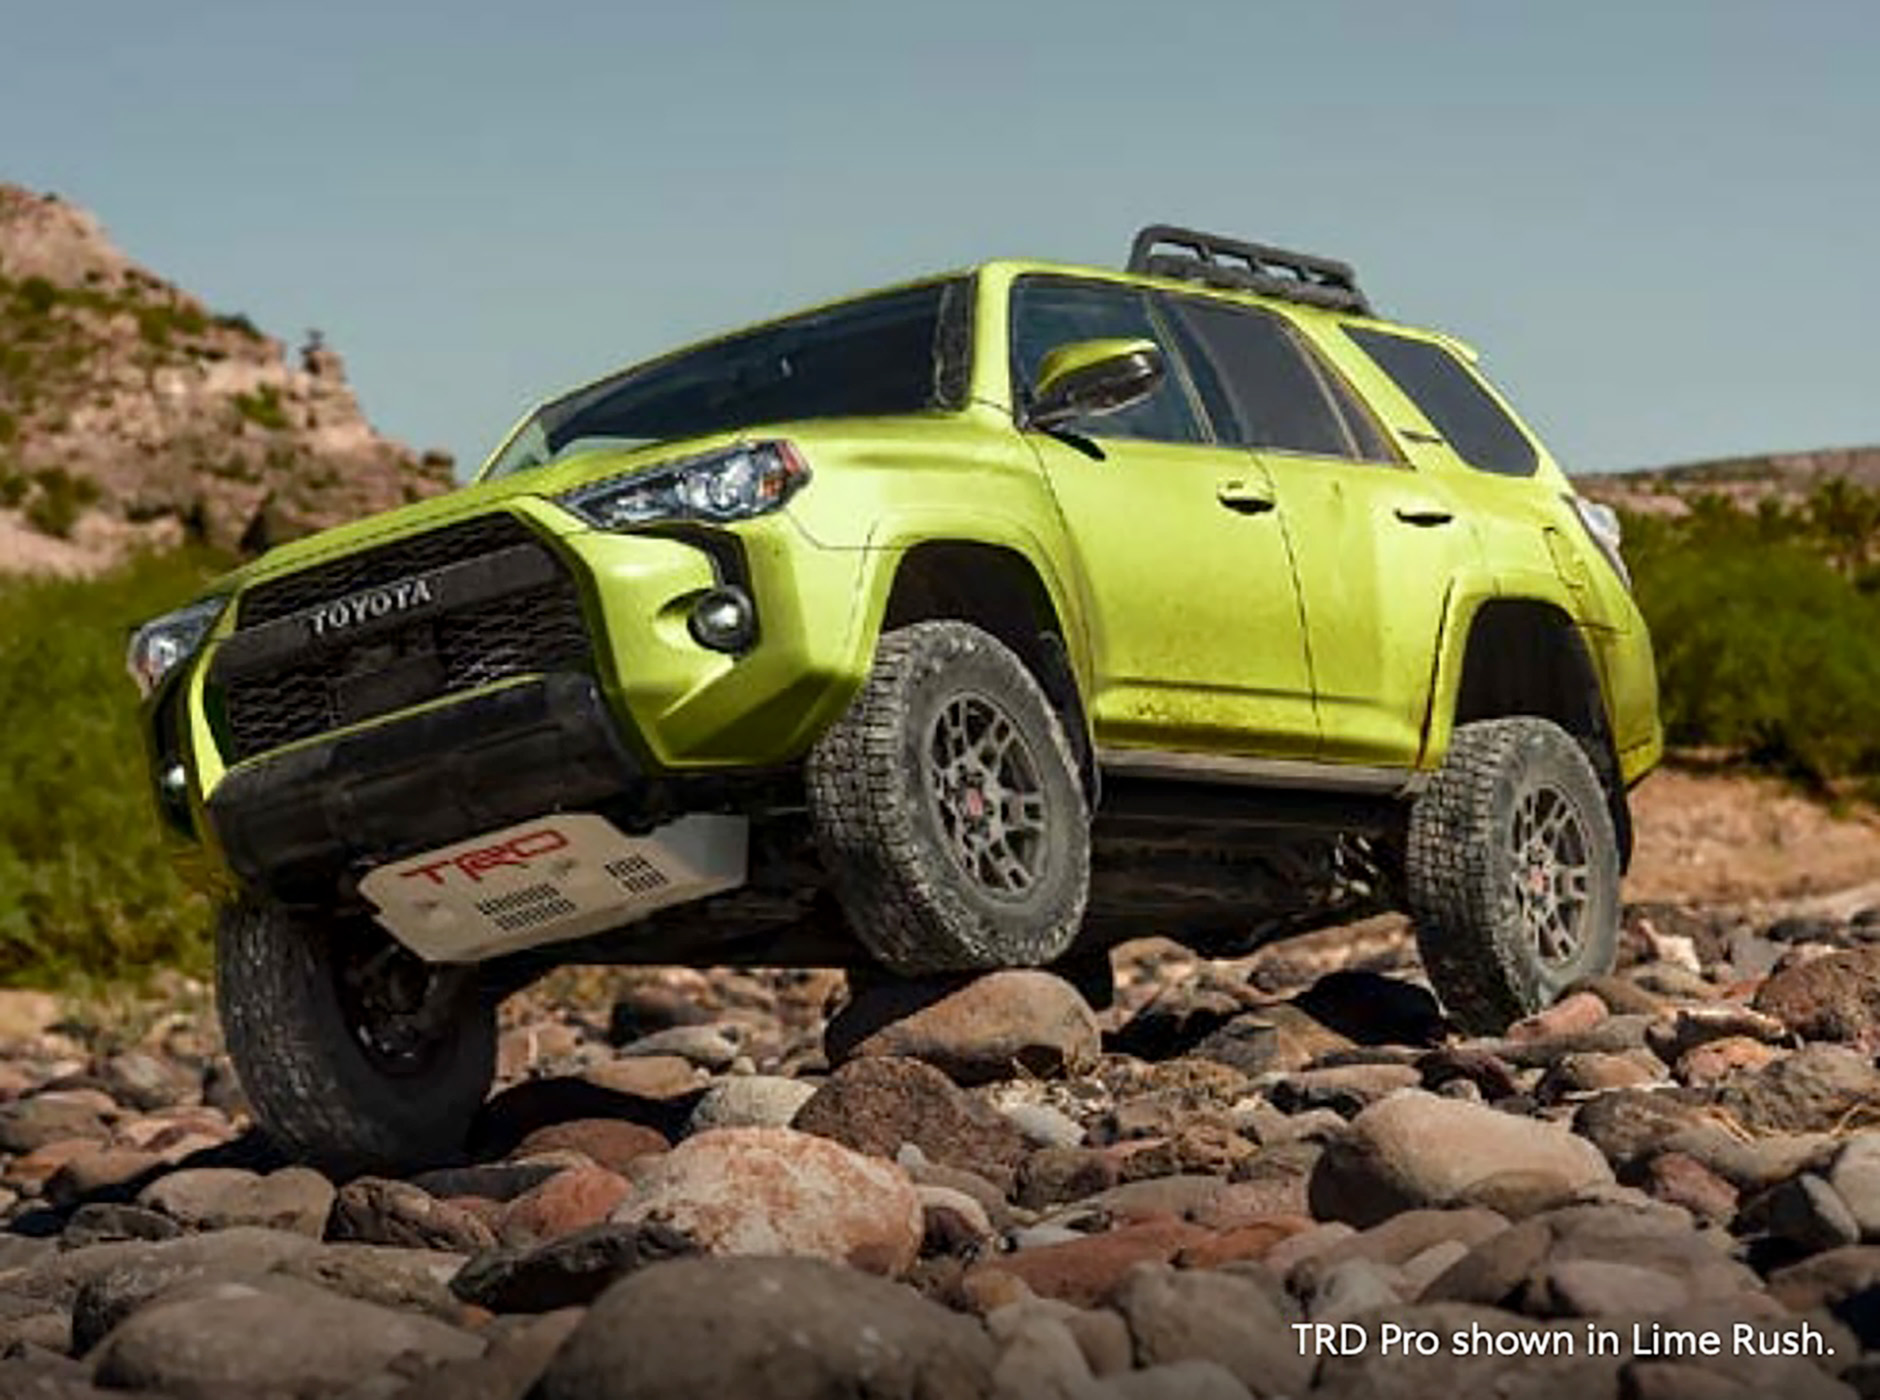 Toyota Publishes 22 4runner Lineup Info Including New Lime Rush Trd Pro The Fast Lane Car